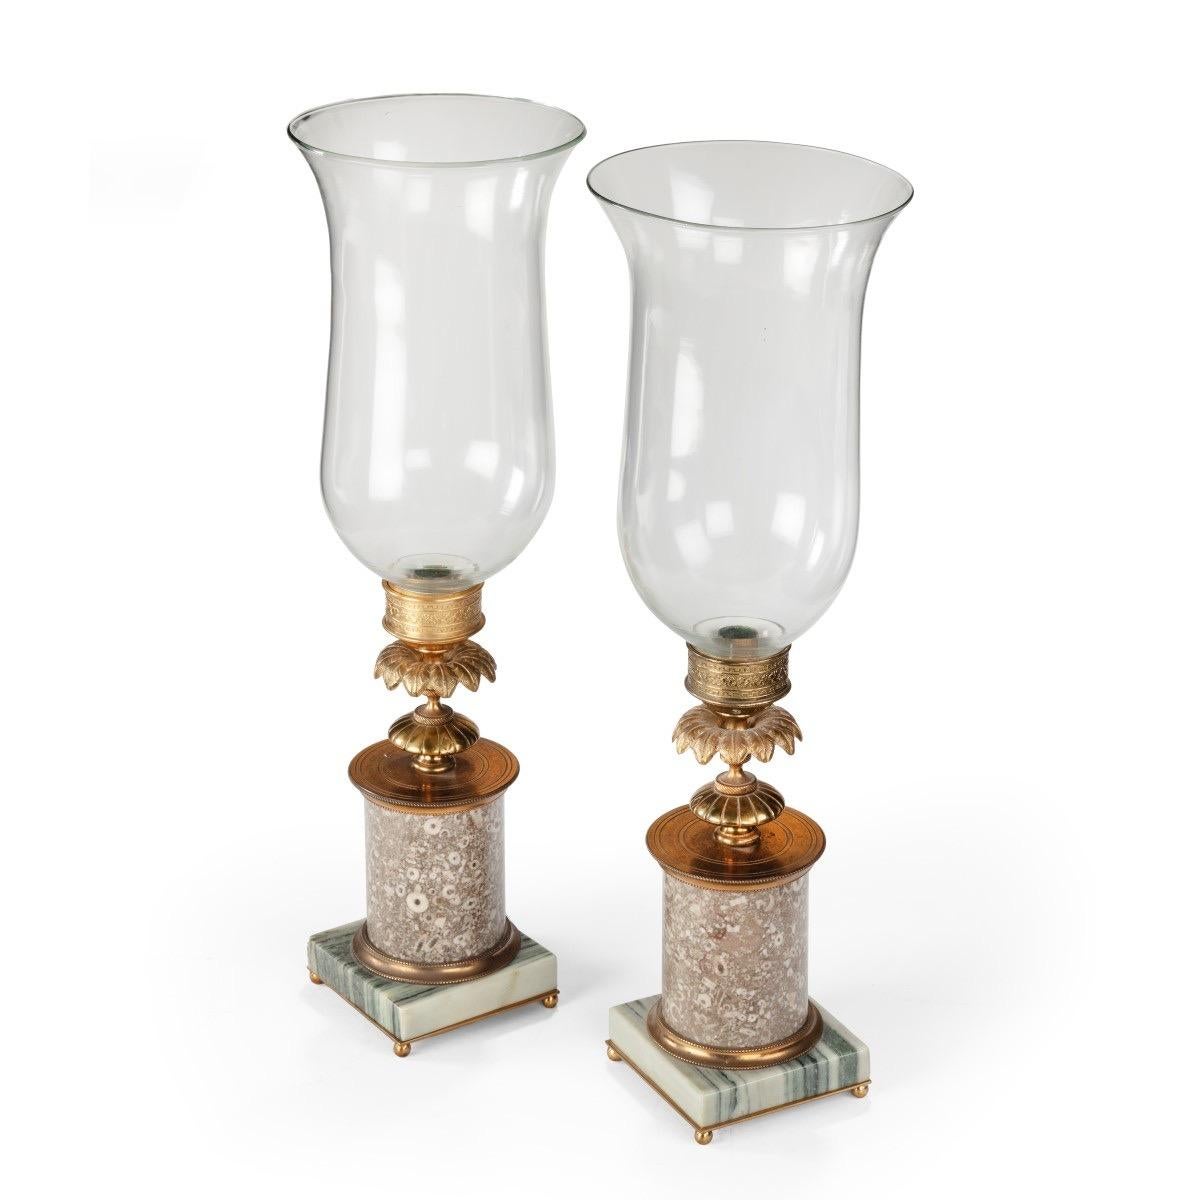 Marble A pair of decorative storm lamps